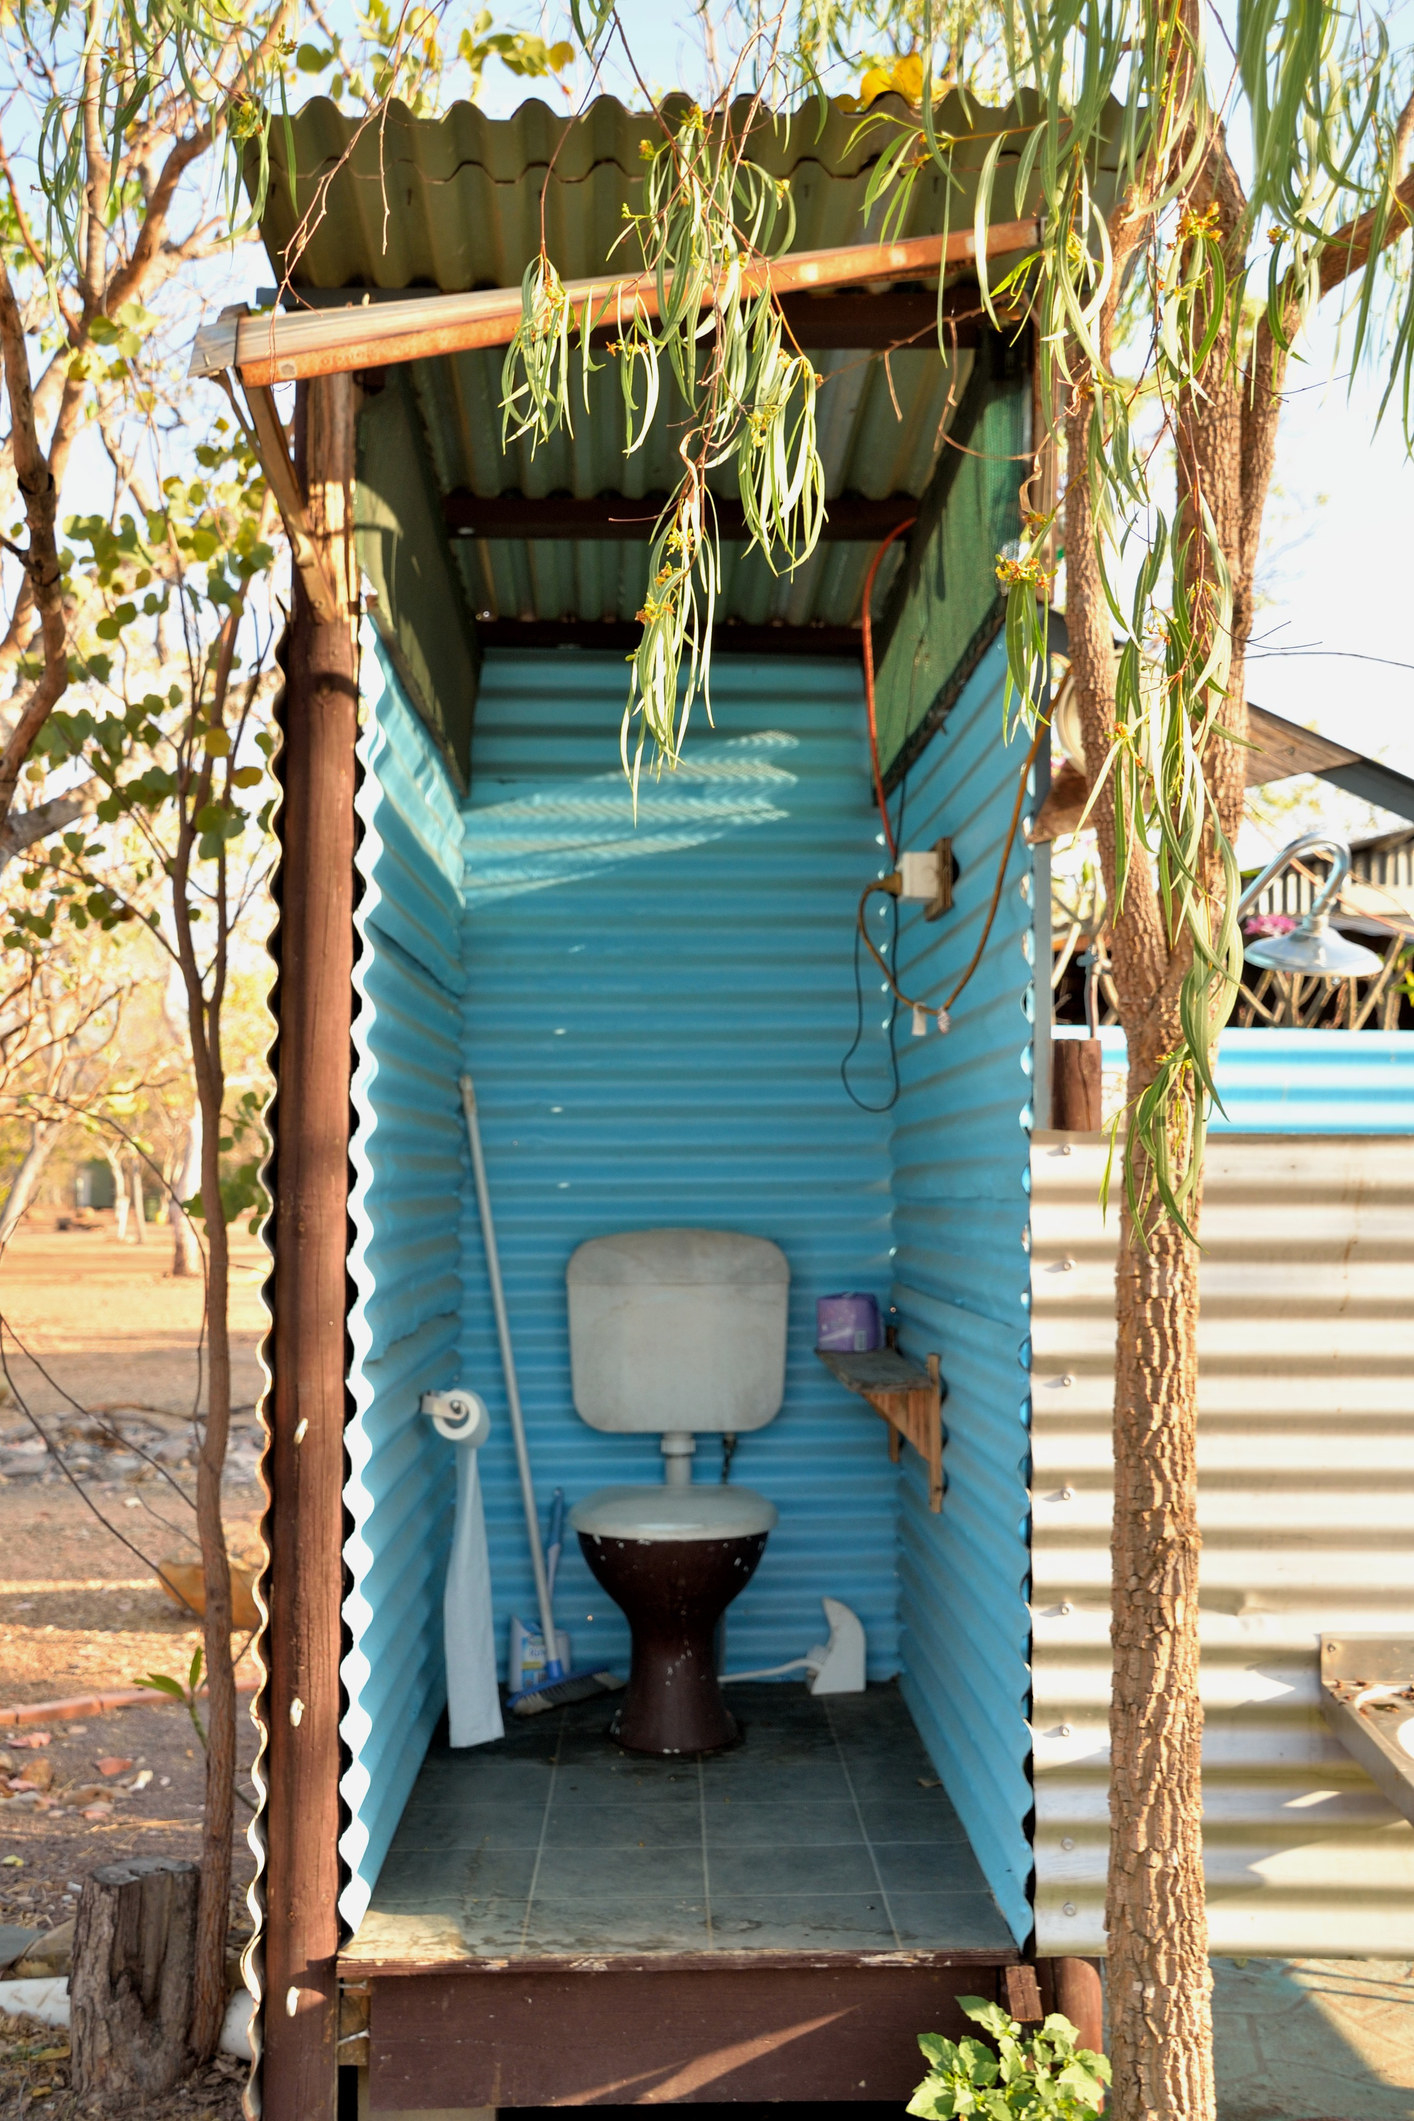 An outdoor toilet with no door at an outback campsite in Australia